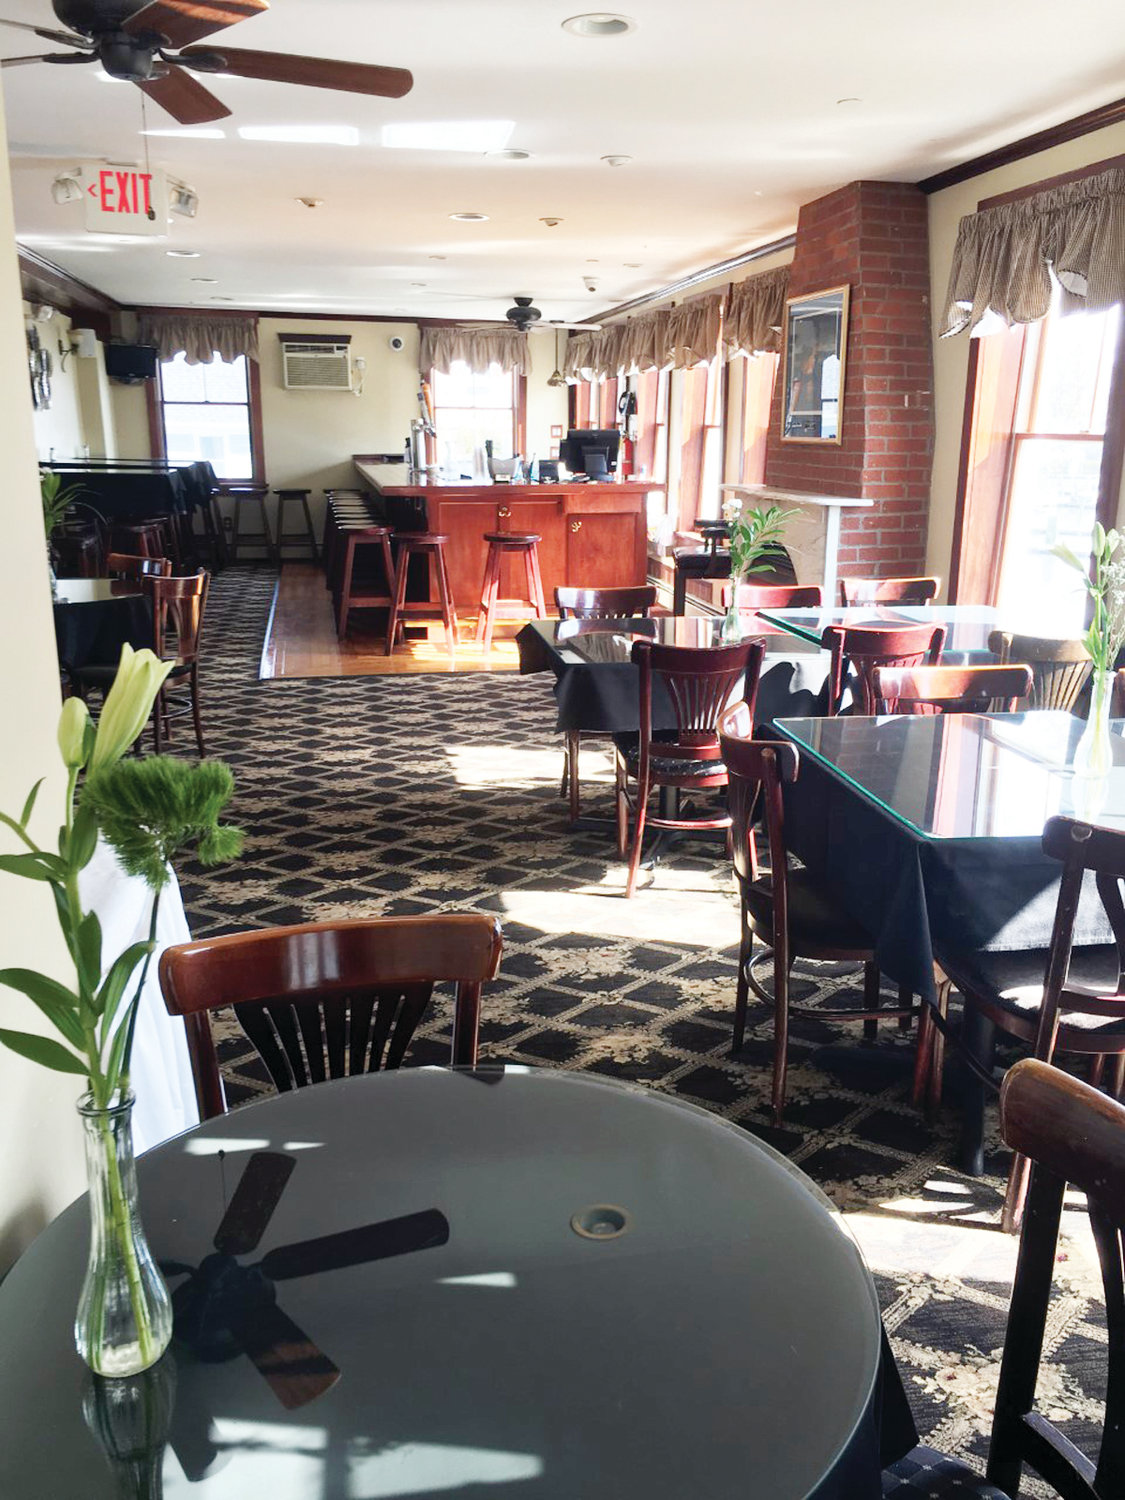 Come to Breffny’s, a casual and inviting private function room located on the second floor of Pawtuxet Village’s popular O’Rourke’s Bar & Grill.  With the winter doldrums setting in, now is the perfect time to liven up your life and host a party for any occasion!  Call 401-499-7061 for details.